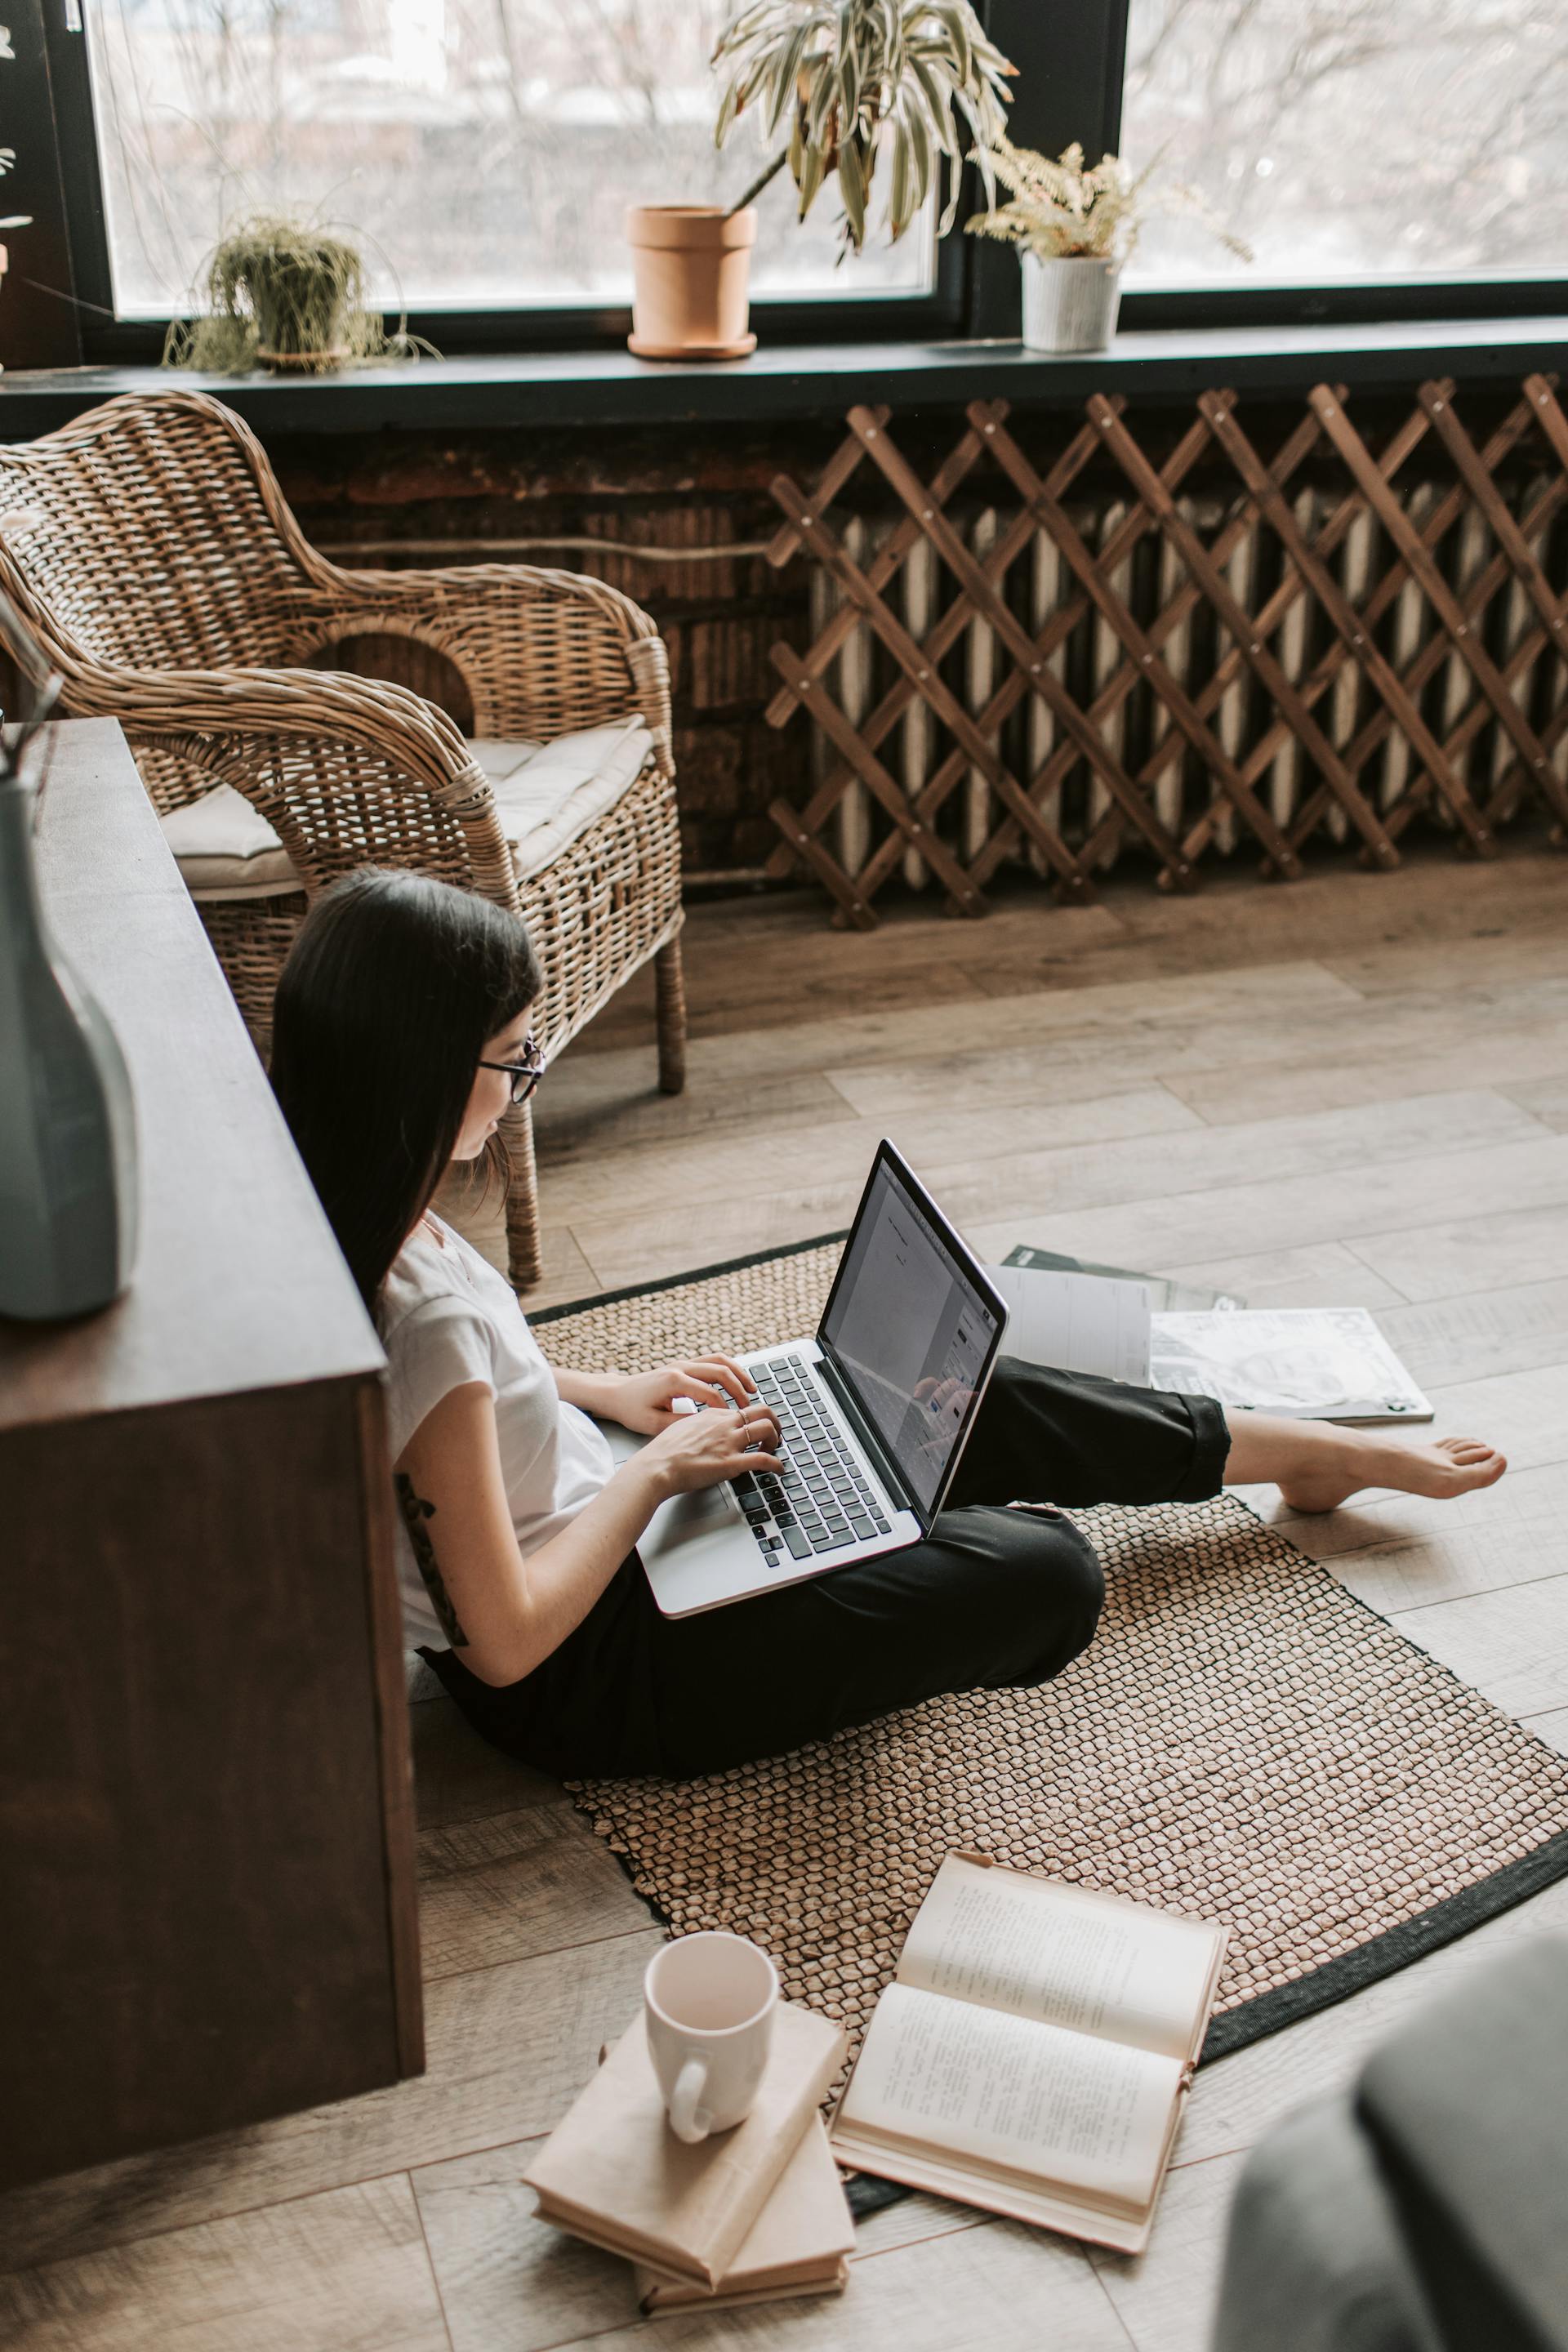 A person sitting on floor using a laptop | Source: Pexels